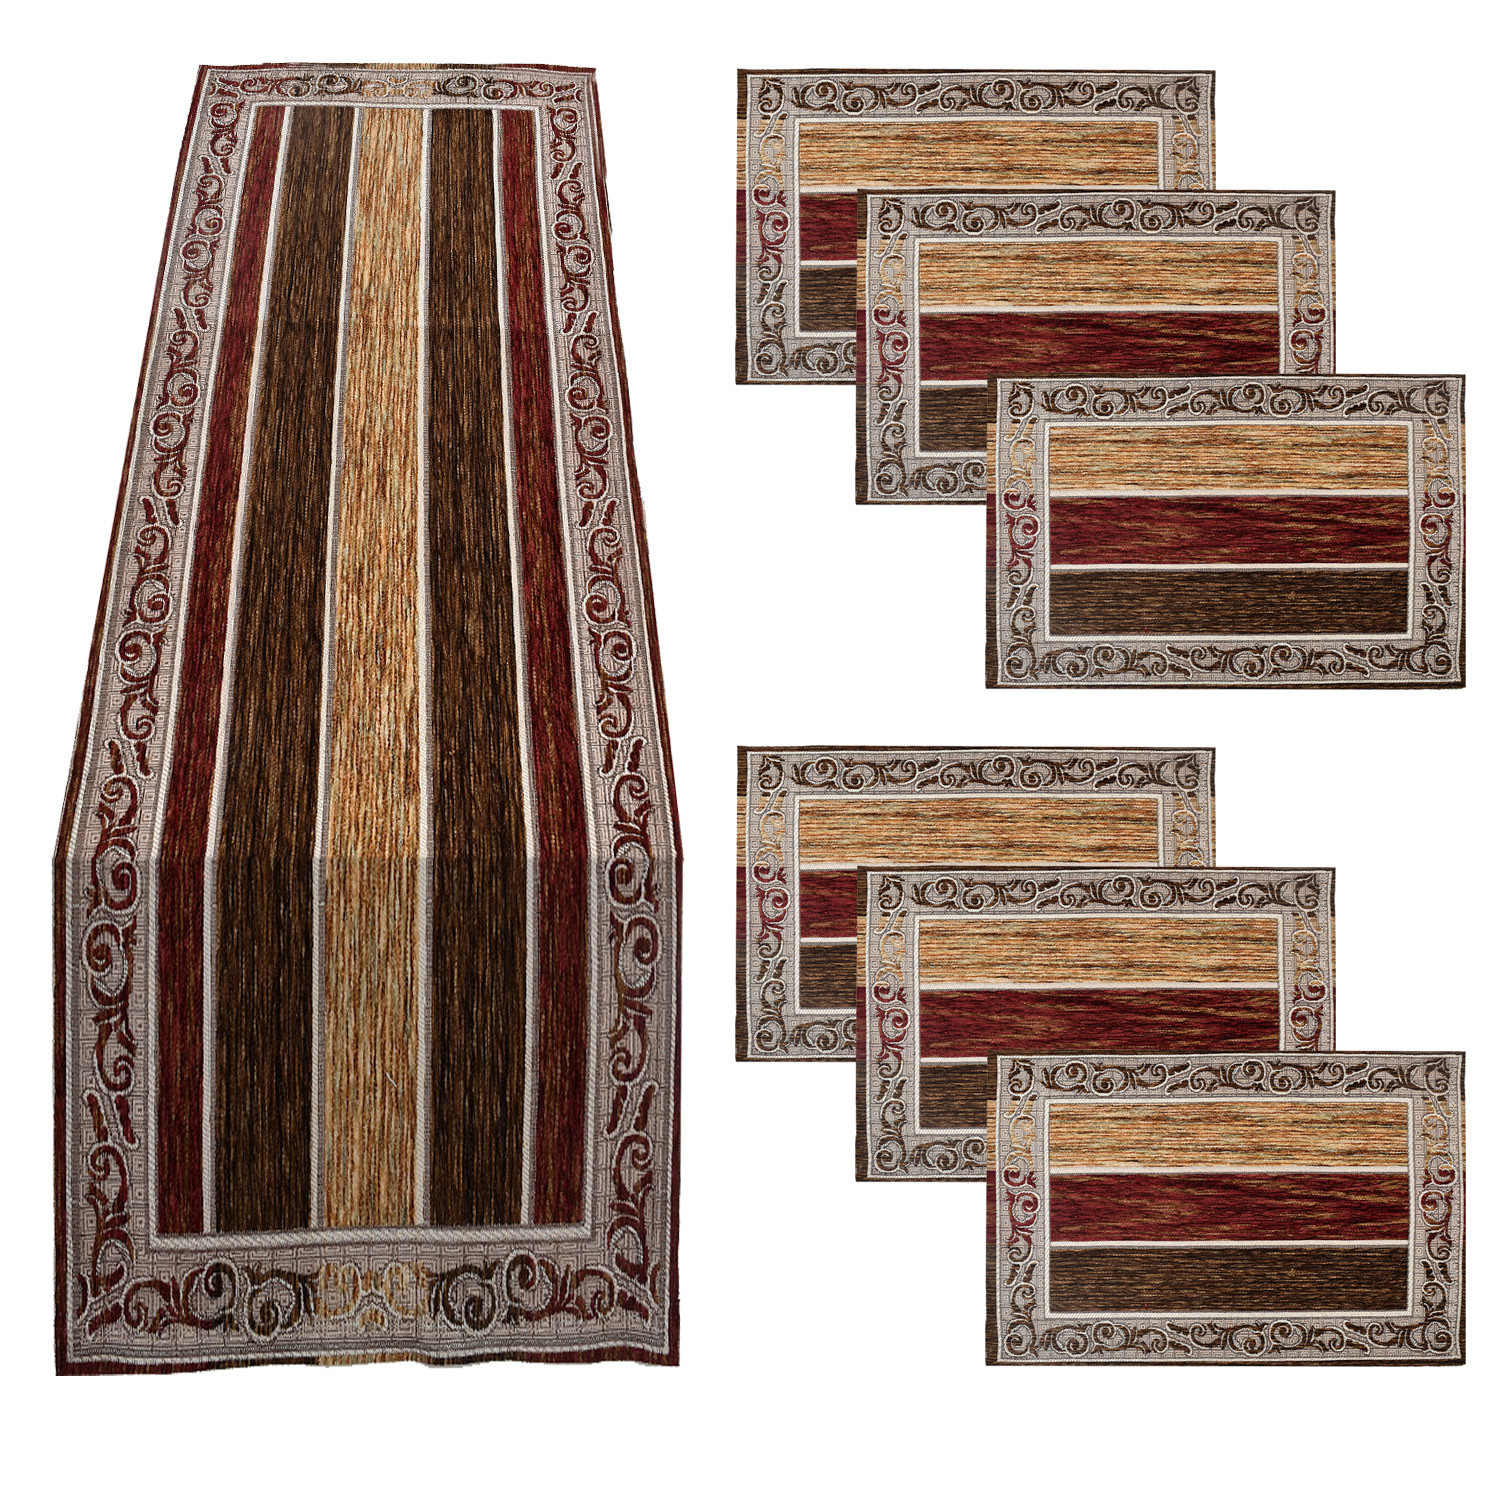 Kuber Industries Dining Table Runner Set|Rich Fabric Damask Pattern Table Mat|Multiclored Strips 6 Placemats for Restaurant & Home Decor,Set of 1 (Maroon)